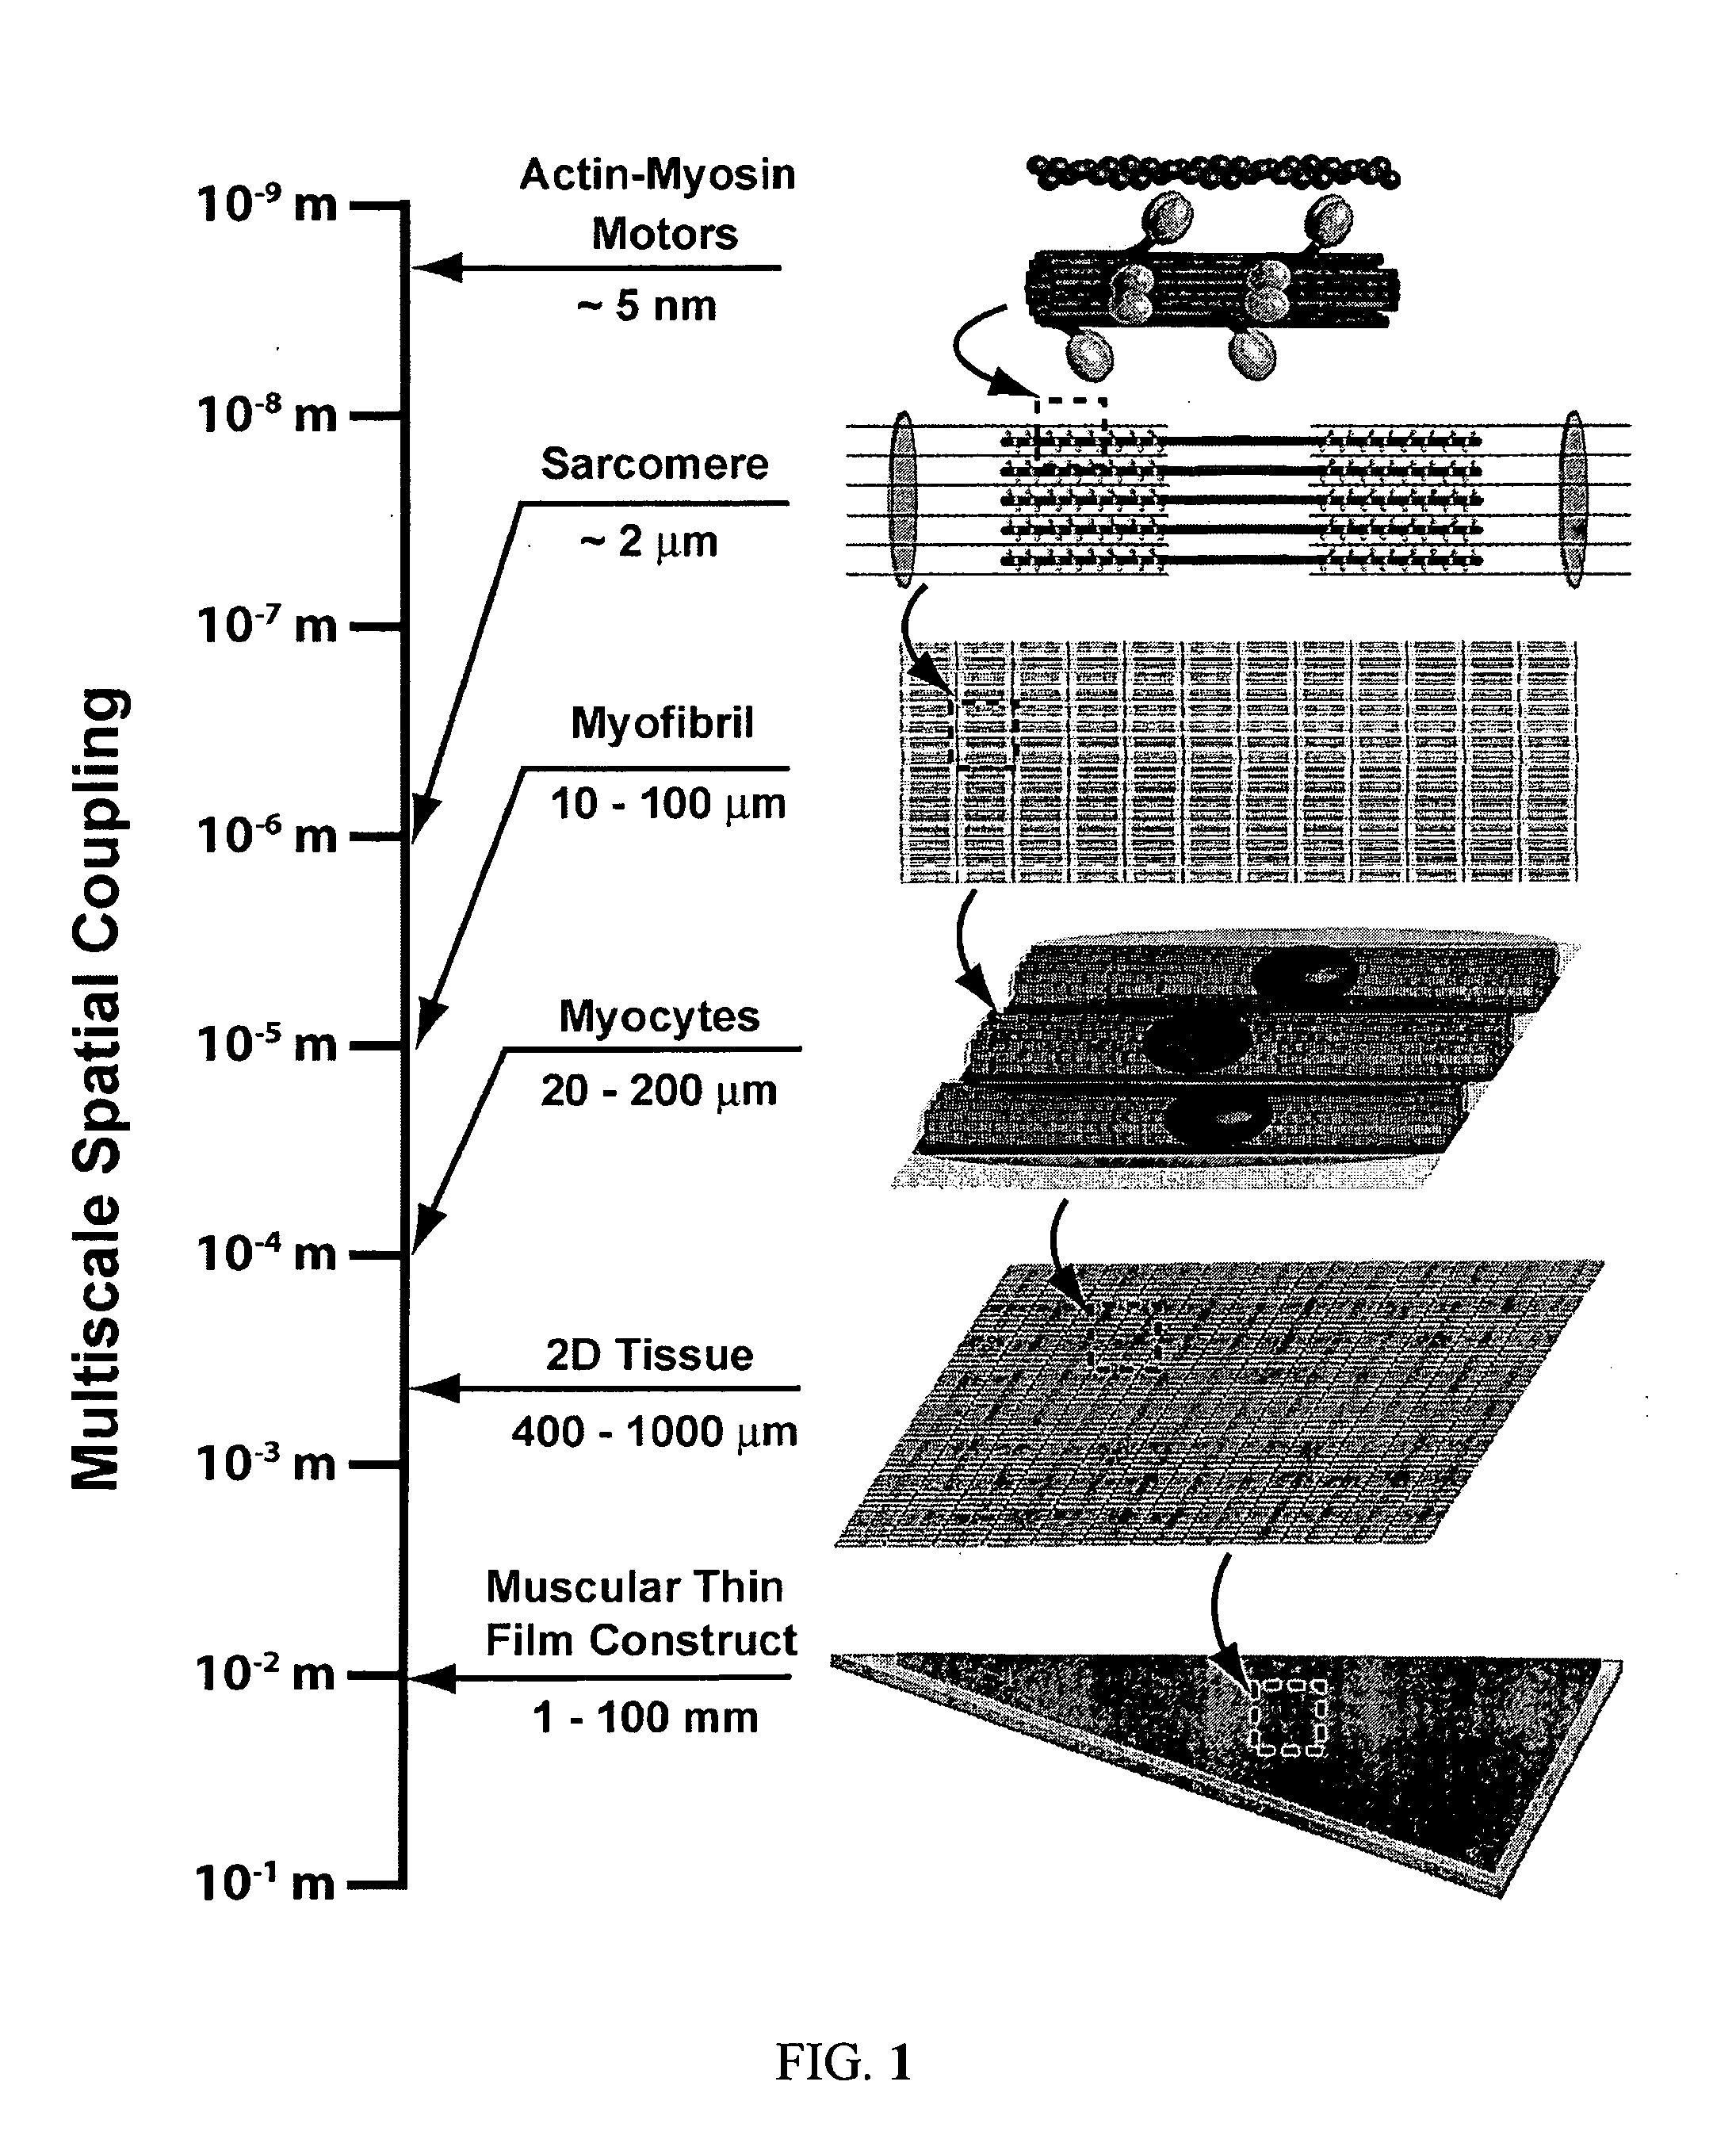 Boundary conditions for the arrangement of cells and tissues